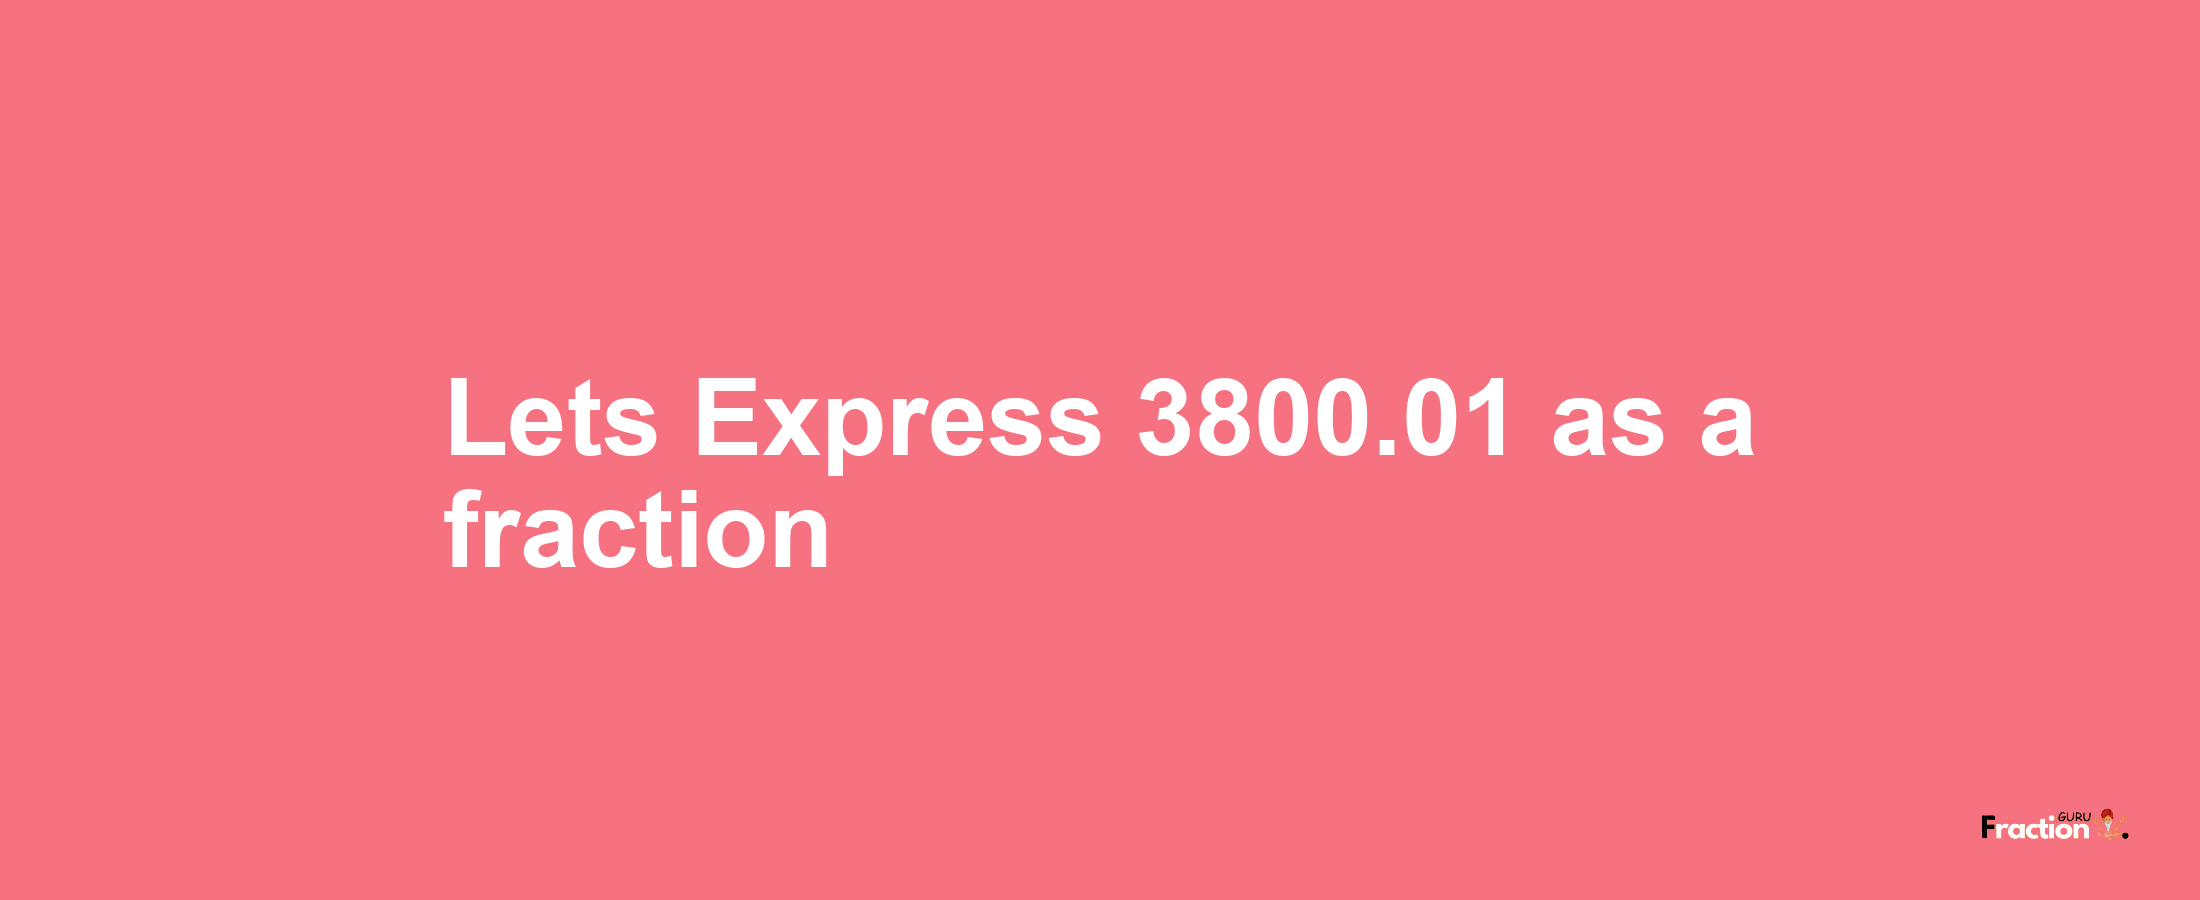 Lets Express 3800.01 as afraction